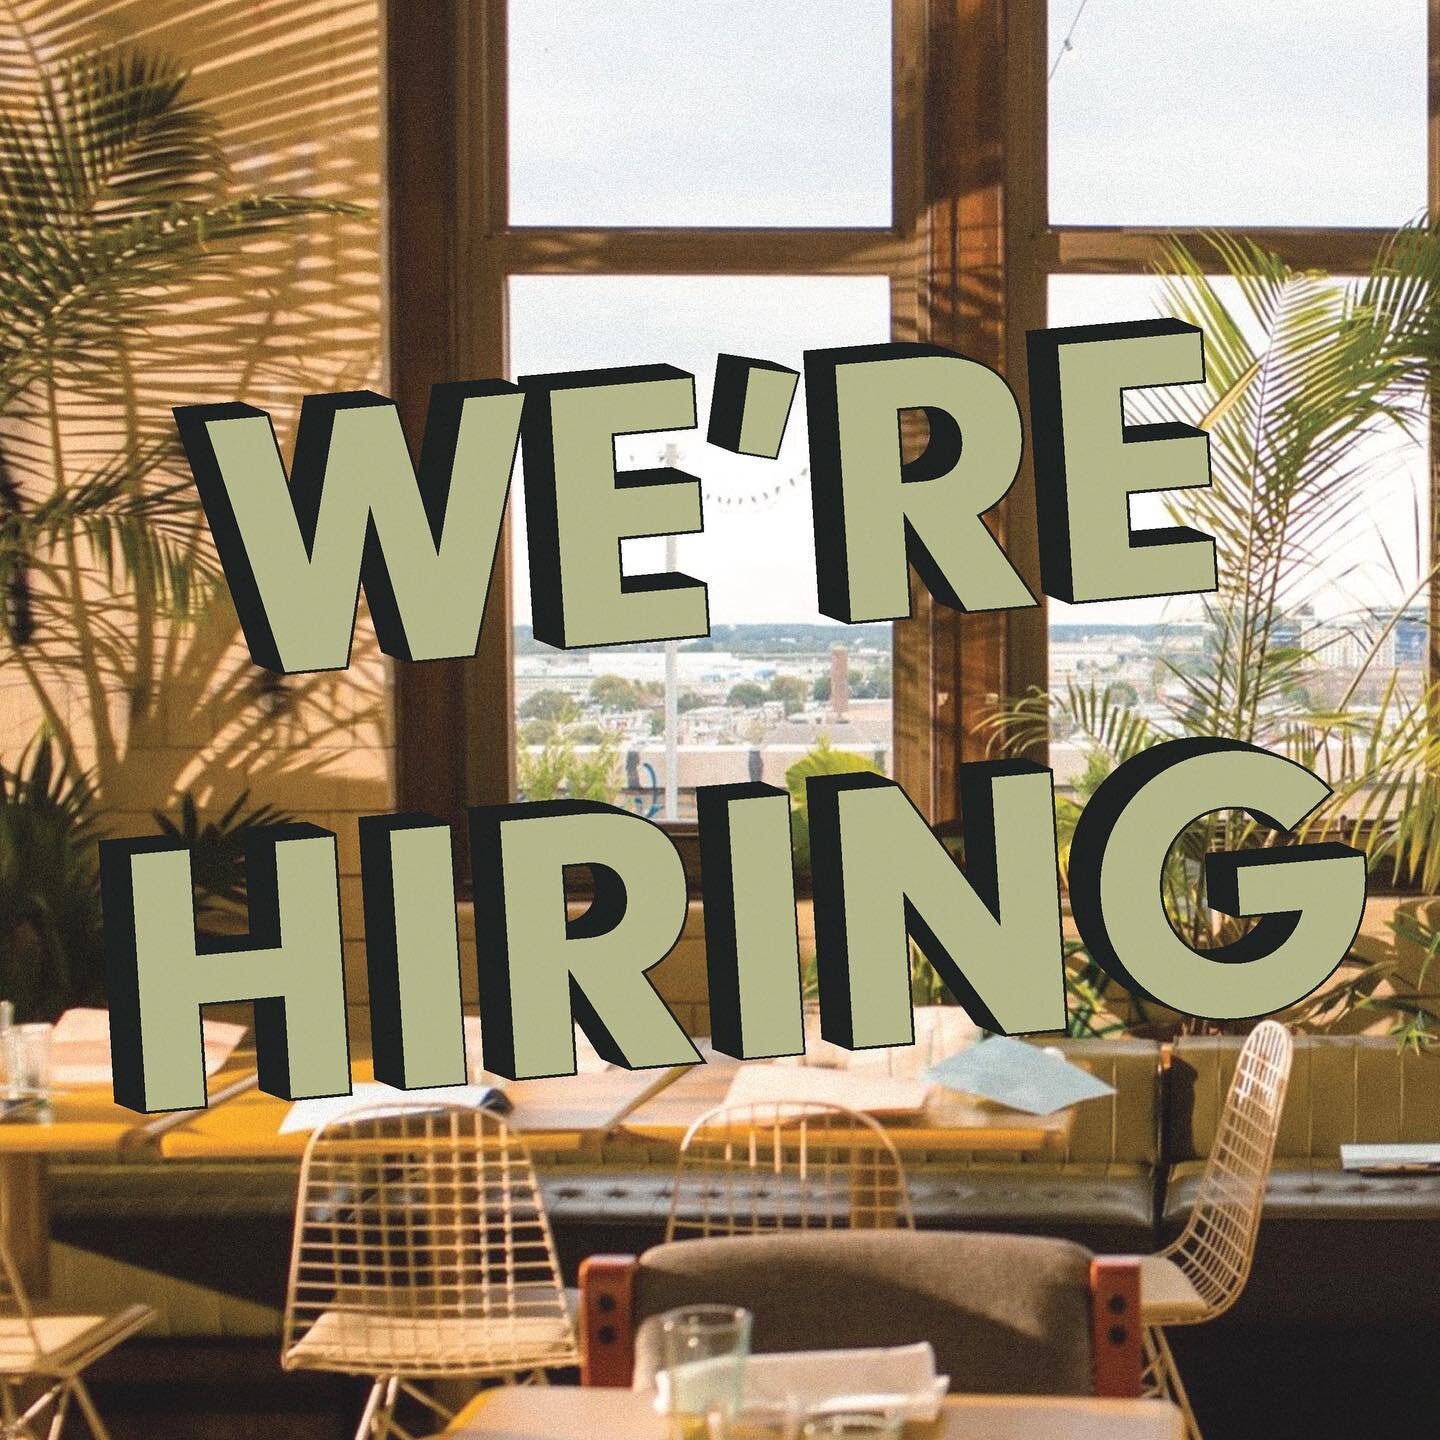 Interested in joining the Irwin&rsquo;s team? We&rsquo;re hiring for FOH positions. We offer livable wages, benefits for full-time employees, and an environment full of incredibly thoughtful food. We&rsquo;re searching for a Reservationist, Host/Mait